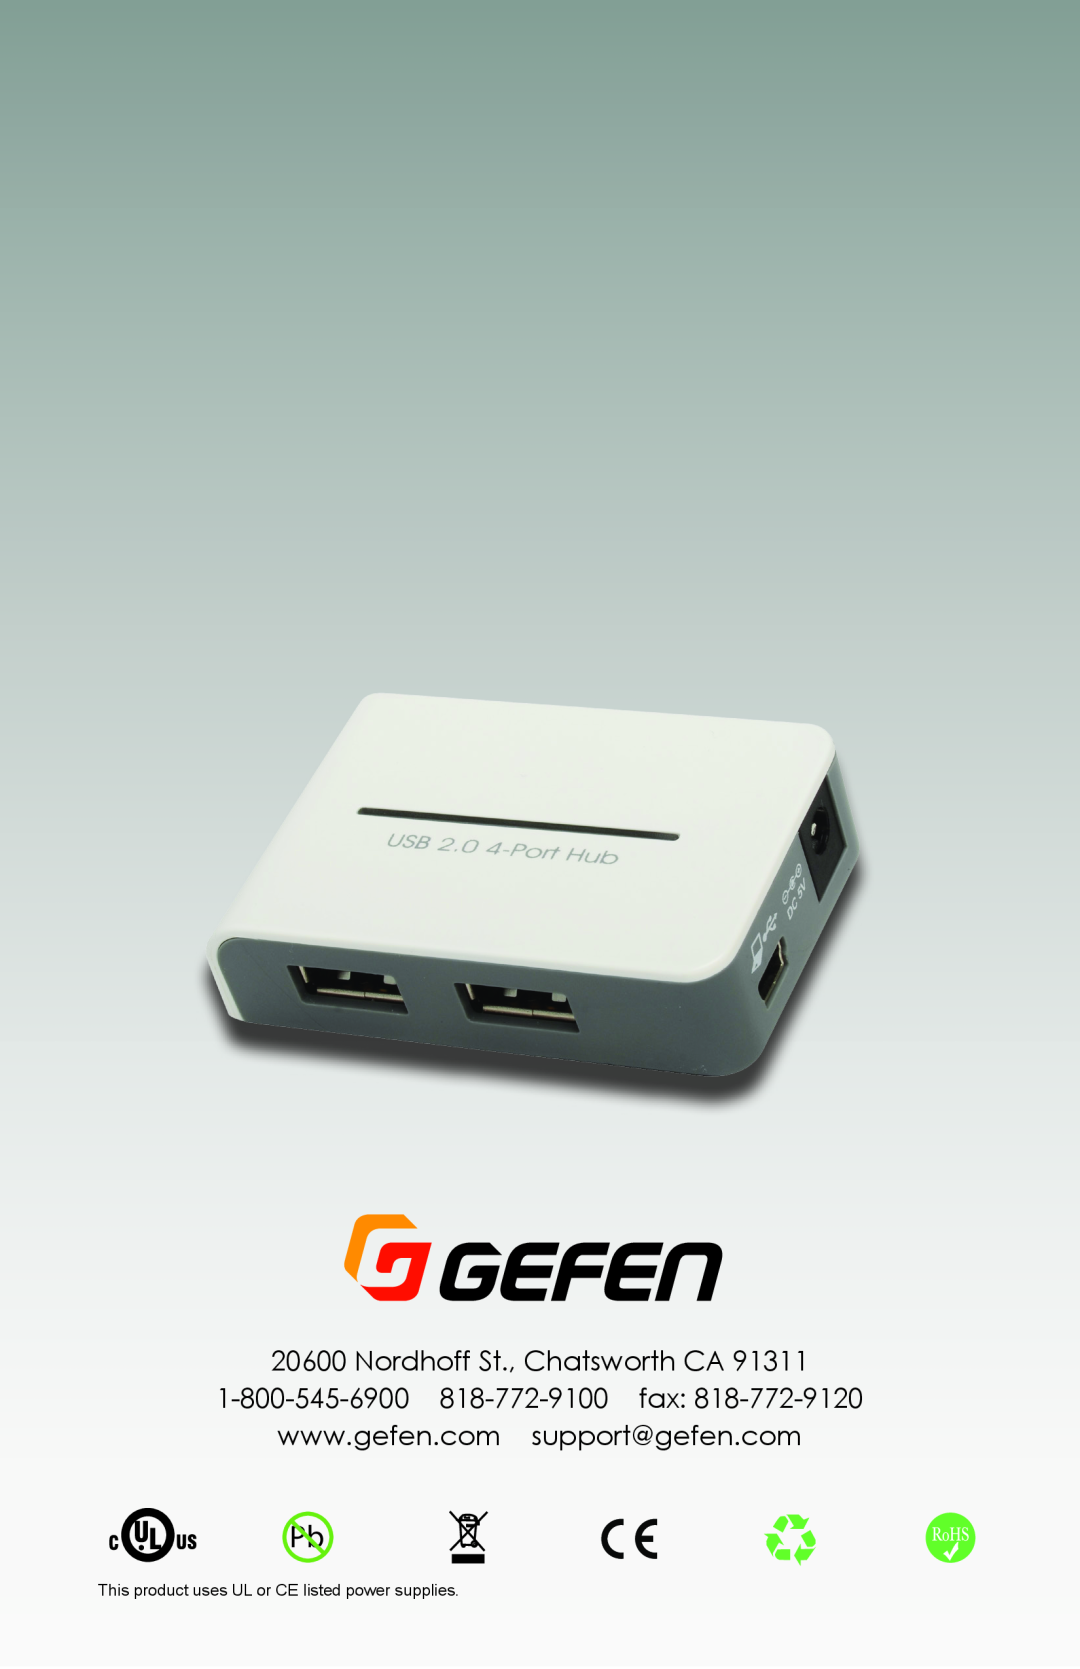 Gefen 144NP user manual Nordhoff St., Chatsworth CA, This product uses UL or CE listed power supplies 